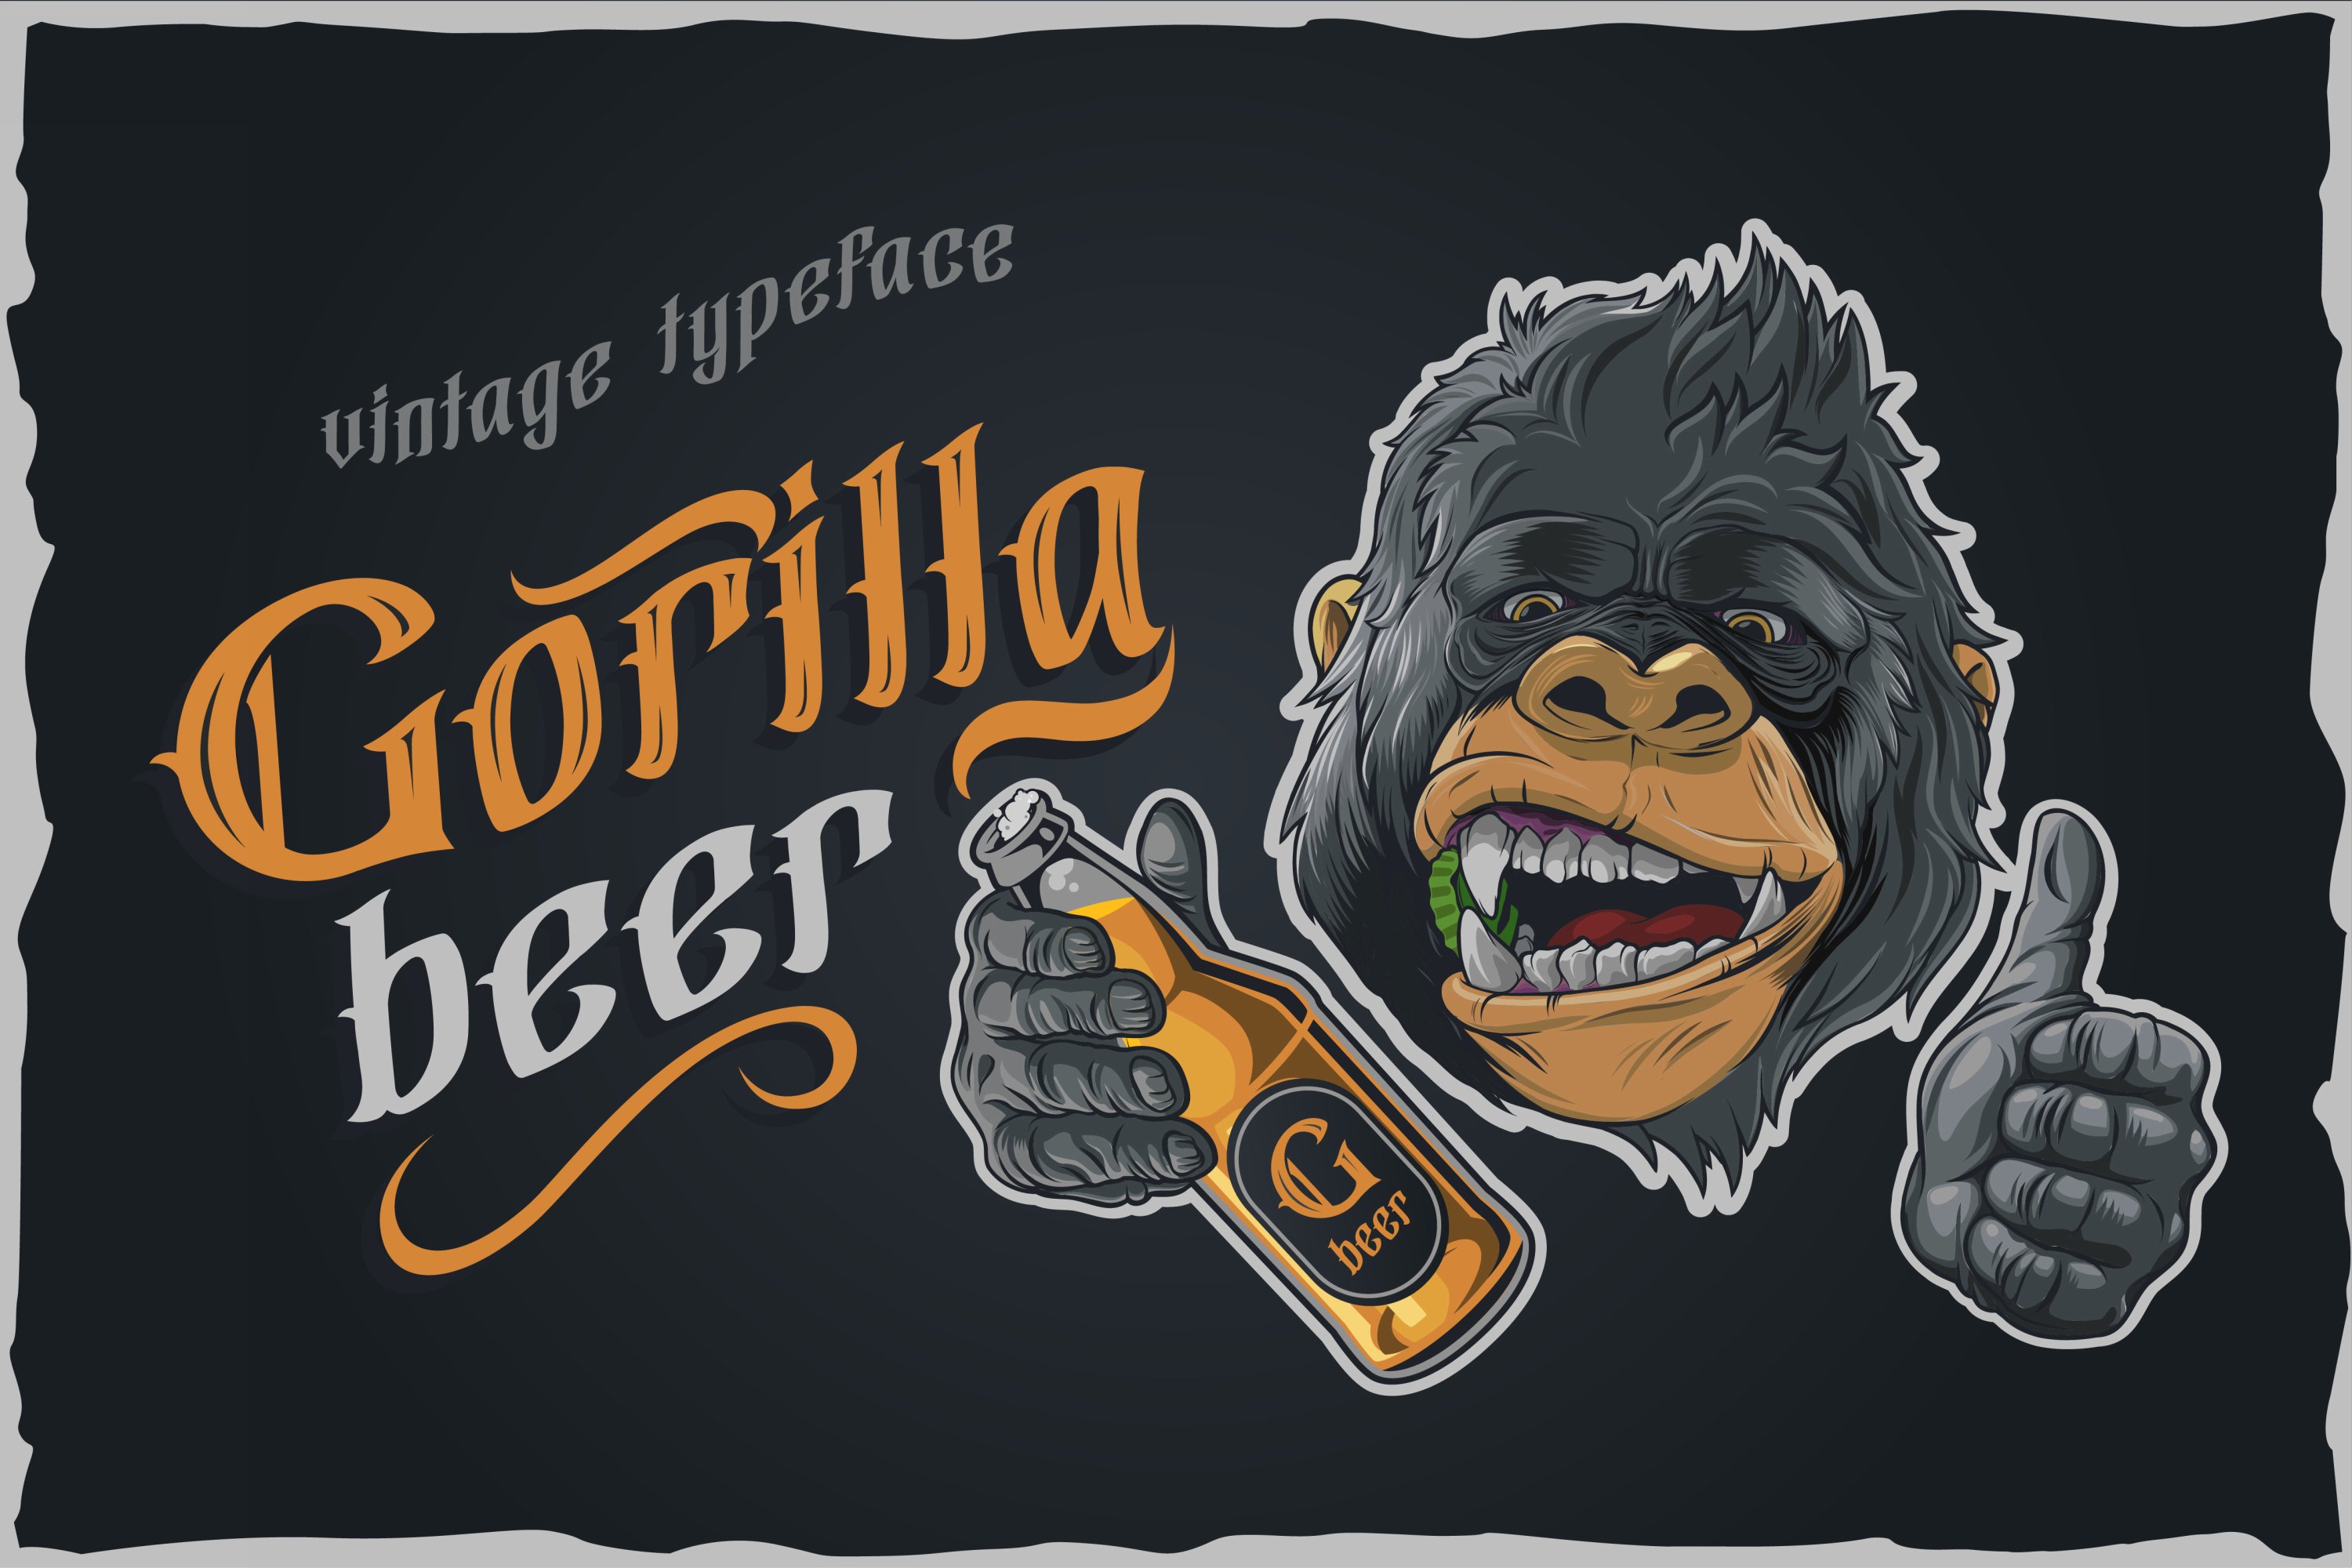 Gorilla beer - gothic typeface preview image.